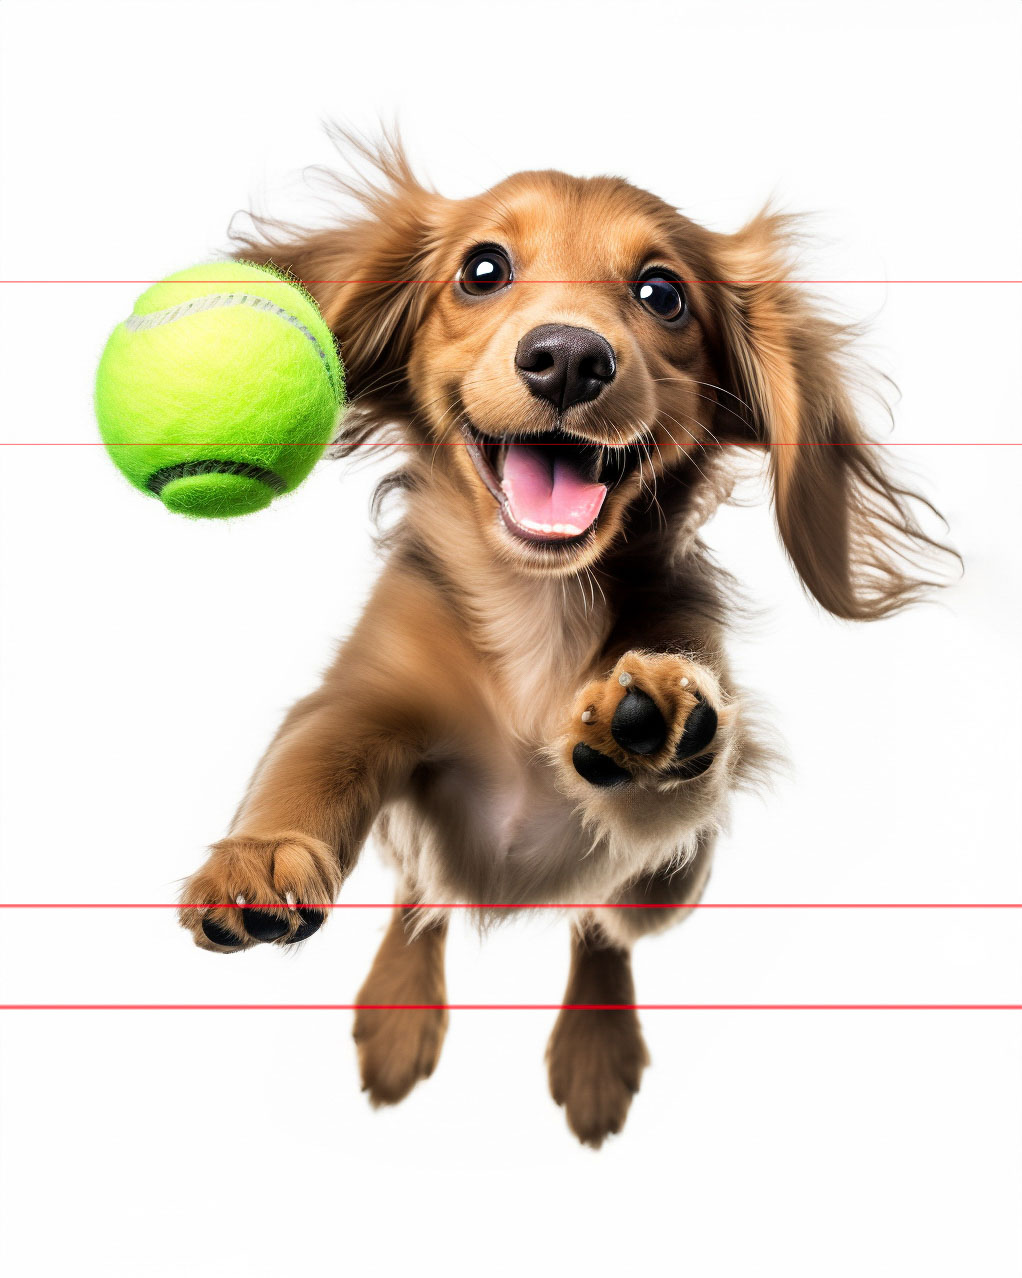 A picture captures a brown long-haired Dachshund leaping joyfully in the air, mouth open and eyes wide, holding a bright green tennis ball between its teeth. The dog's ears and fur fly back from the motion, with its front paws extended forward as if running toward the viewer against a white background.